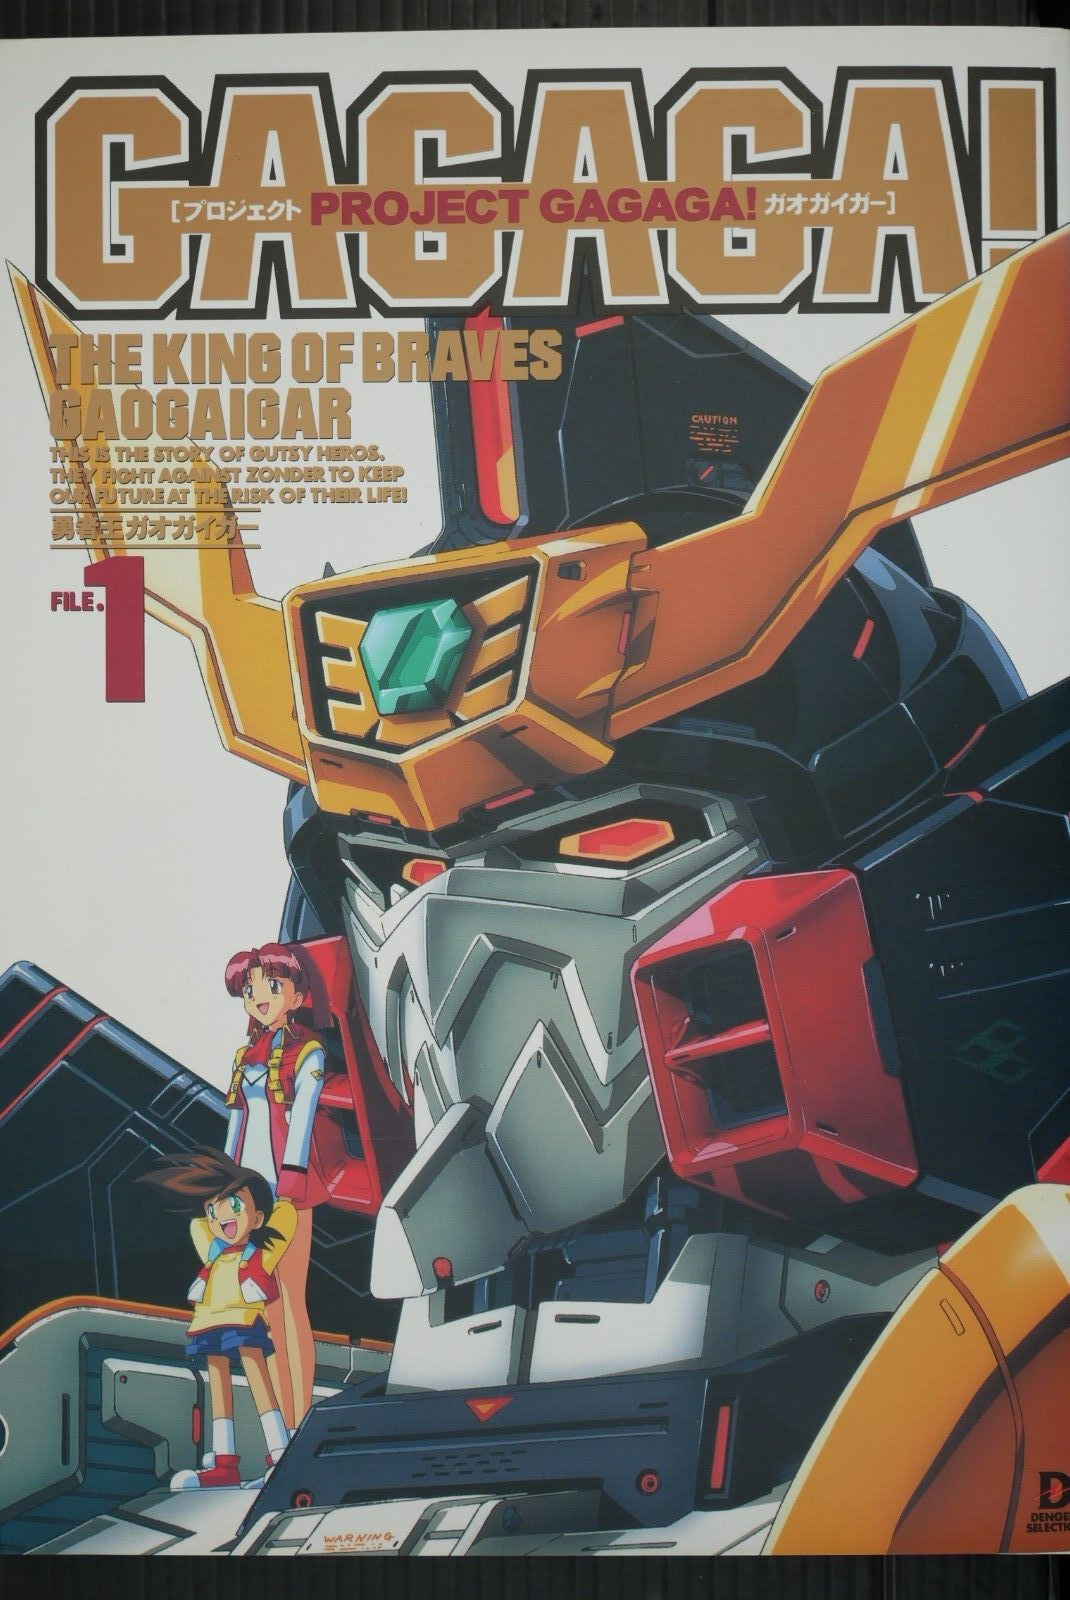 The King of Braves GaoGaiGar Project GAGAGA (Guide Book) - from JAPAN